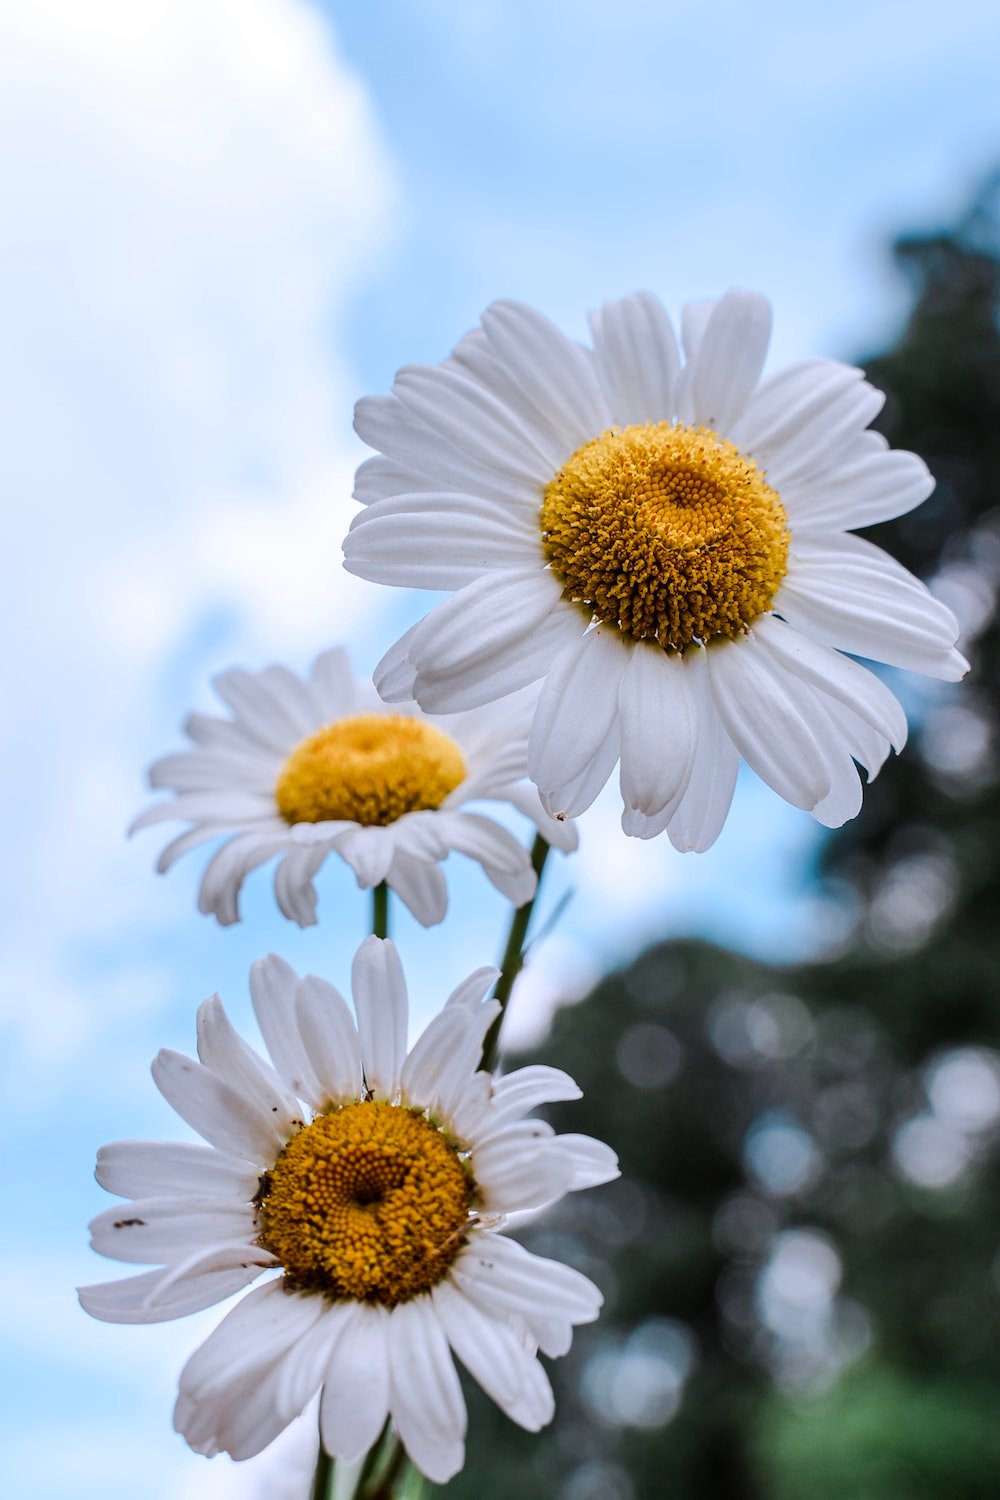 Daisy Flower Picture. Download Free Image